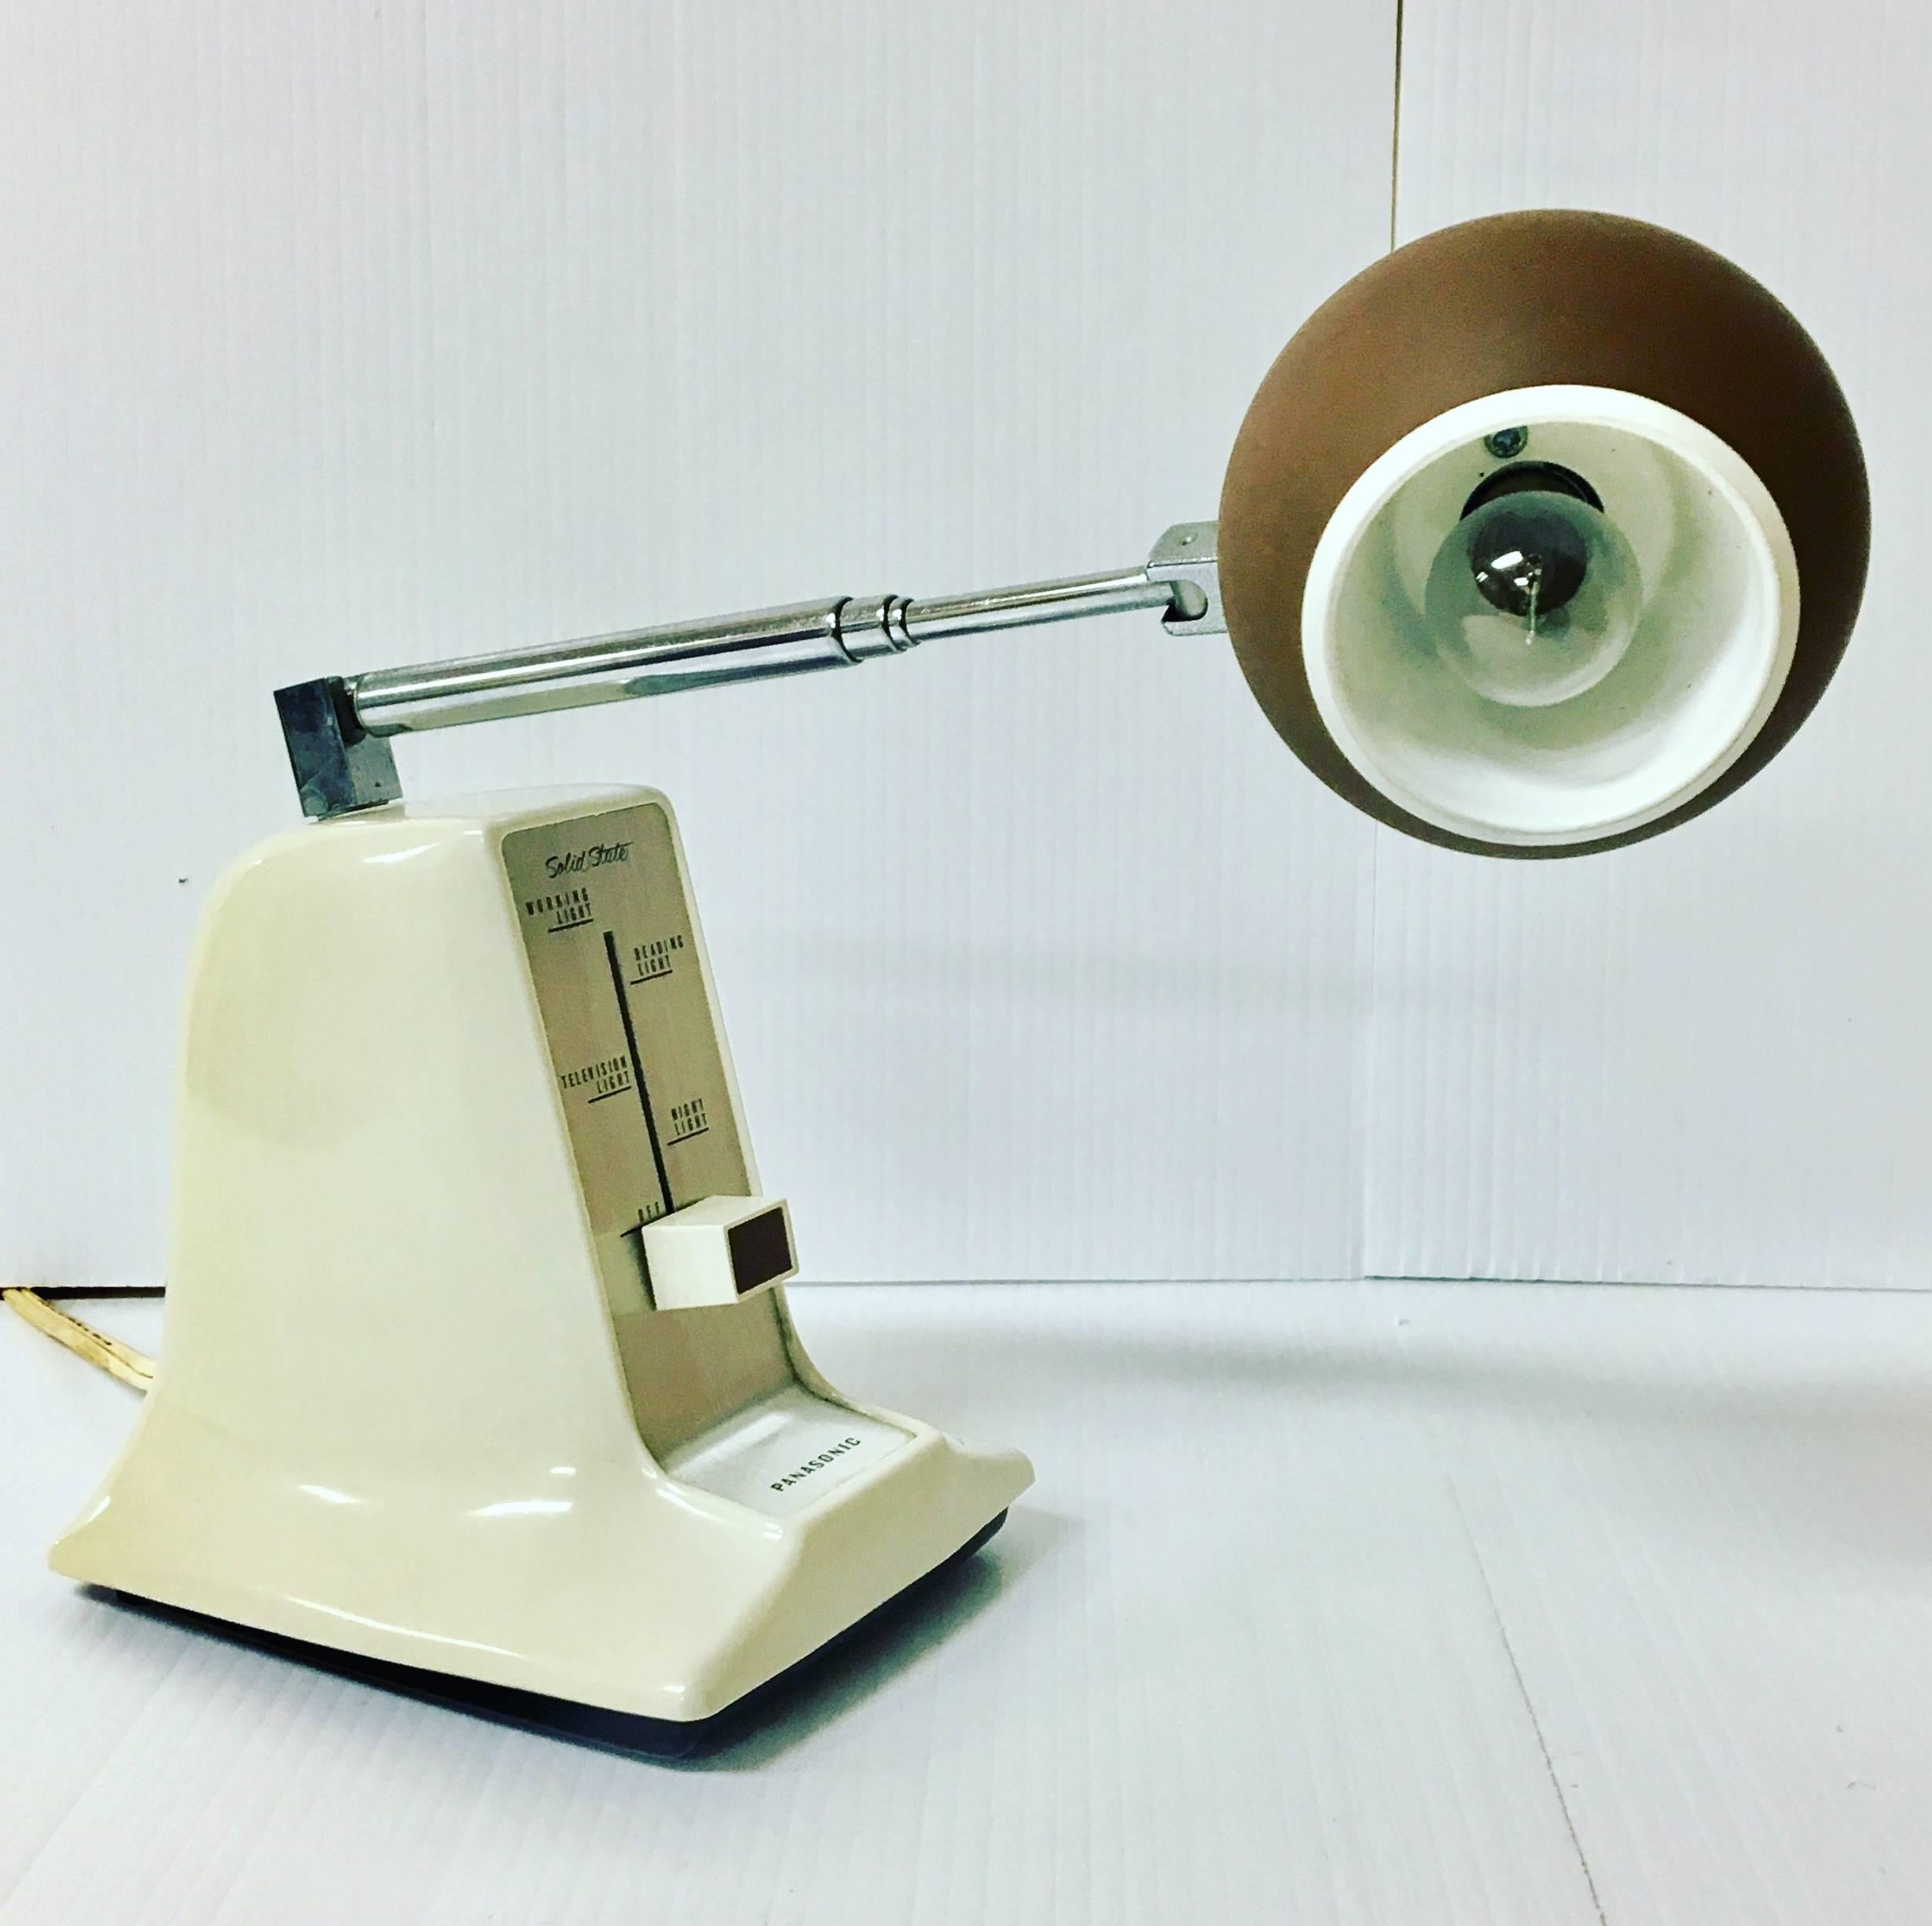 Cool and unique small telescopic eyeball desk table lamp by Panasonic (Model LS-201E). This unique lamp comes with a solid state dimmer switch; the eyeball rotates from side to side and the arm moves up and down. Excellent vintage working condition.